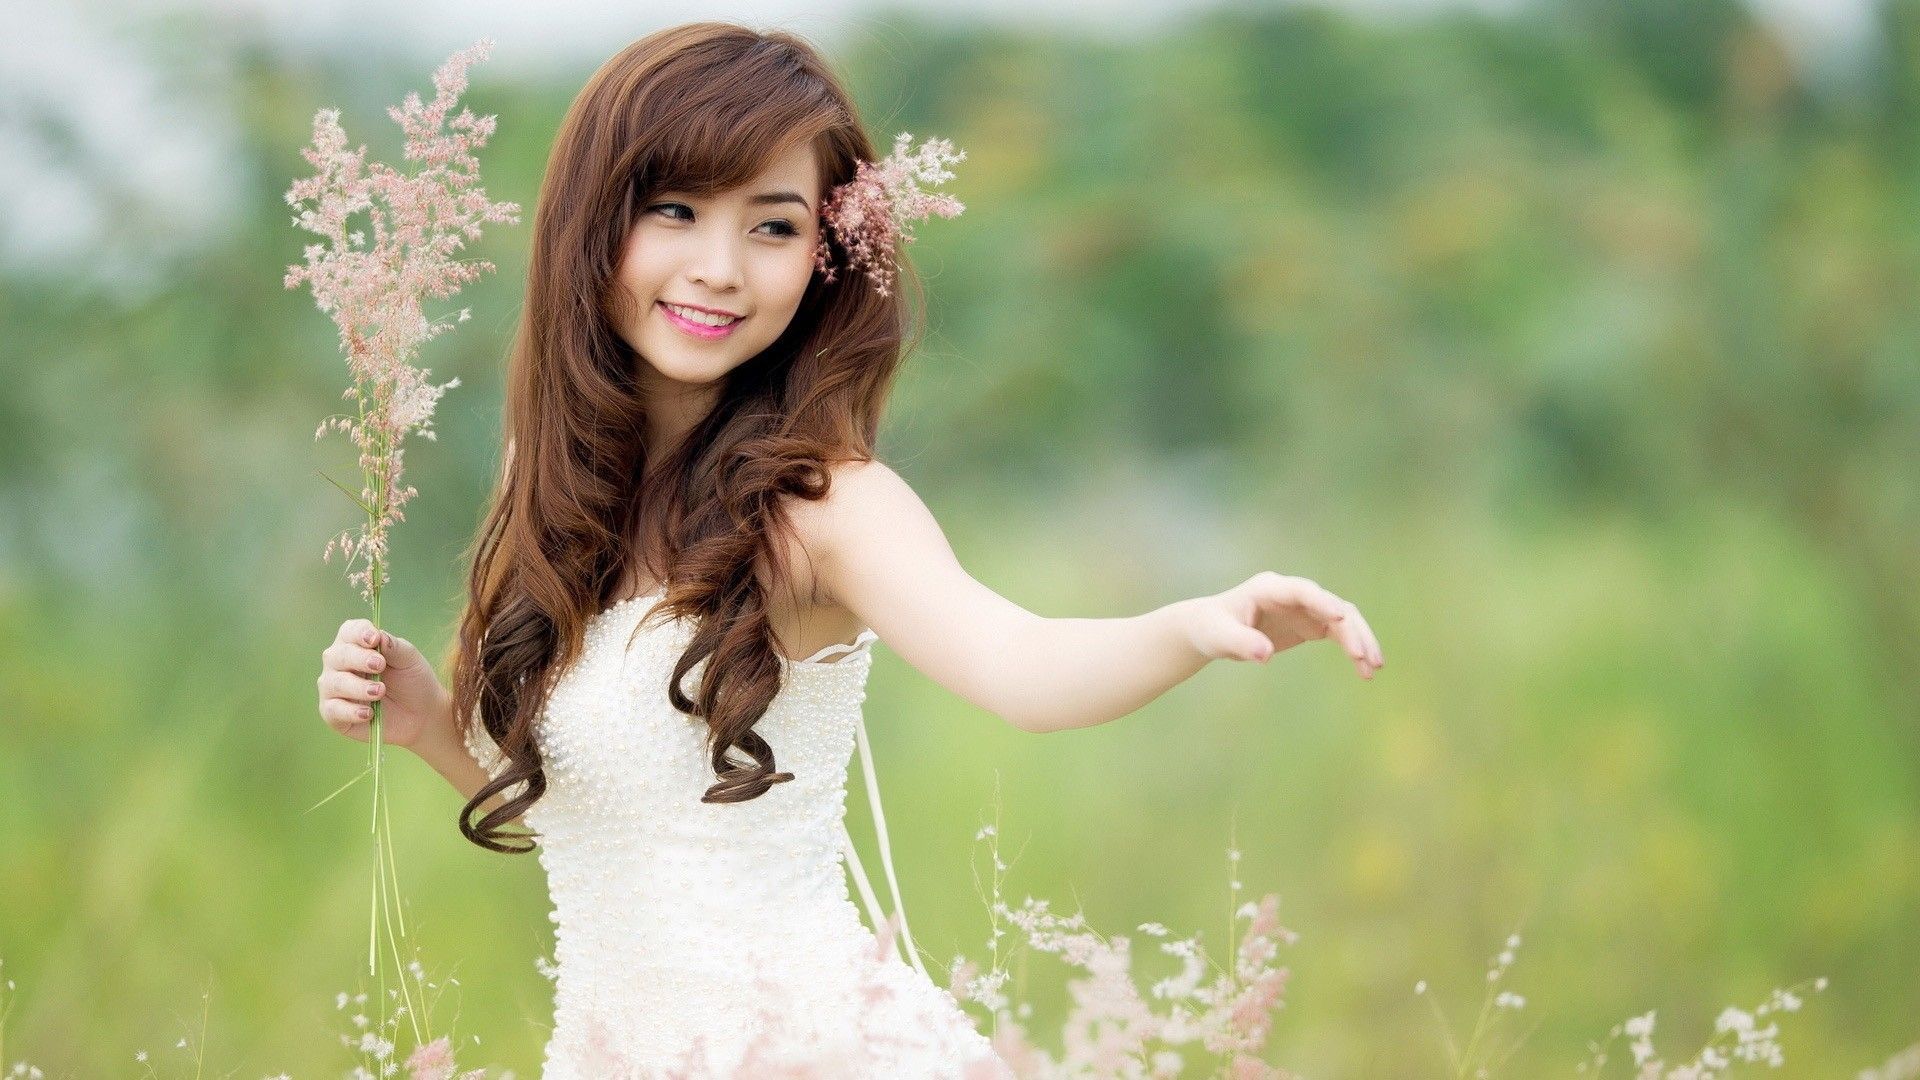 Chinese Girls Wallpapers HD Pictures One HD Wallpaper Pictures